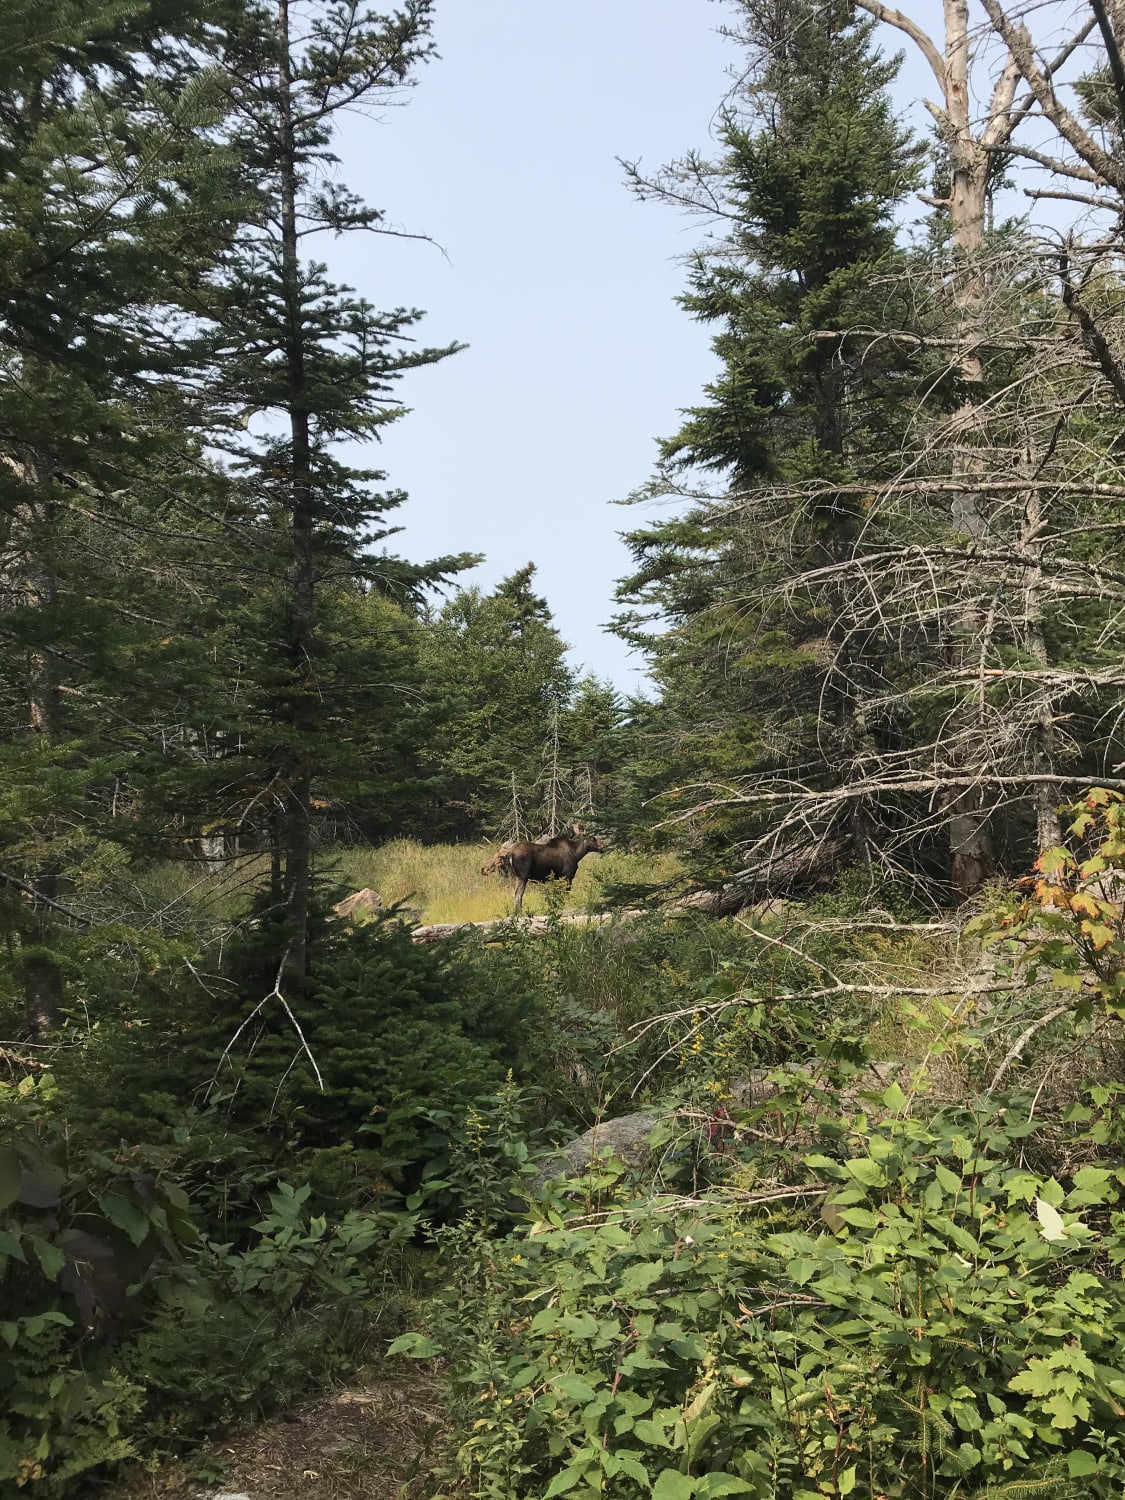 Two Moose Spotted, Lost Pond Trail, Pinkham Notch, New Hampshire, USA